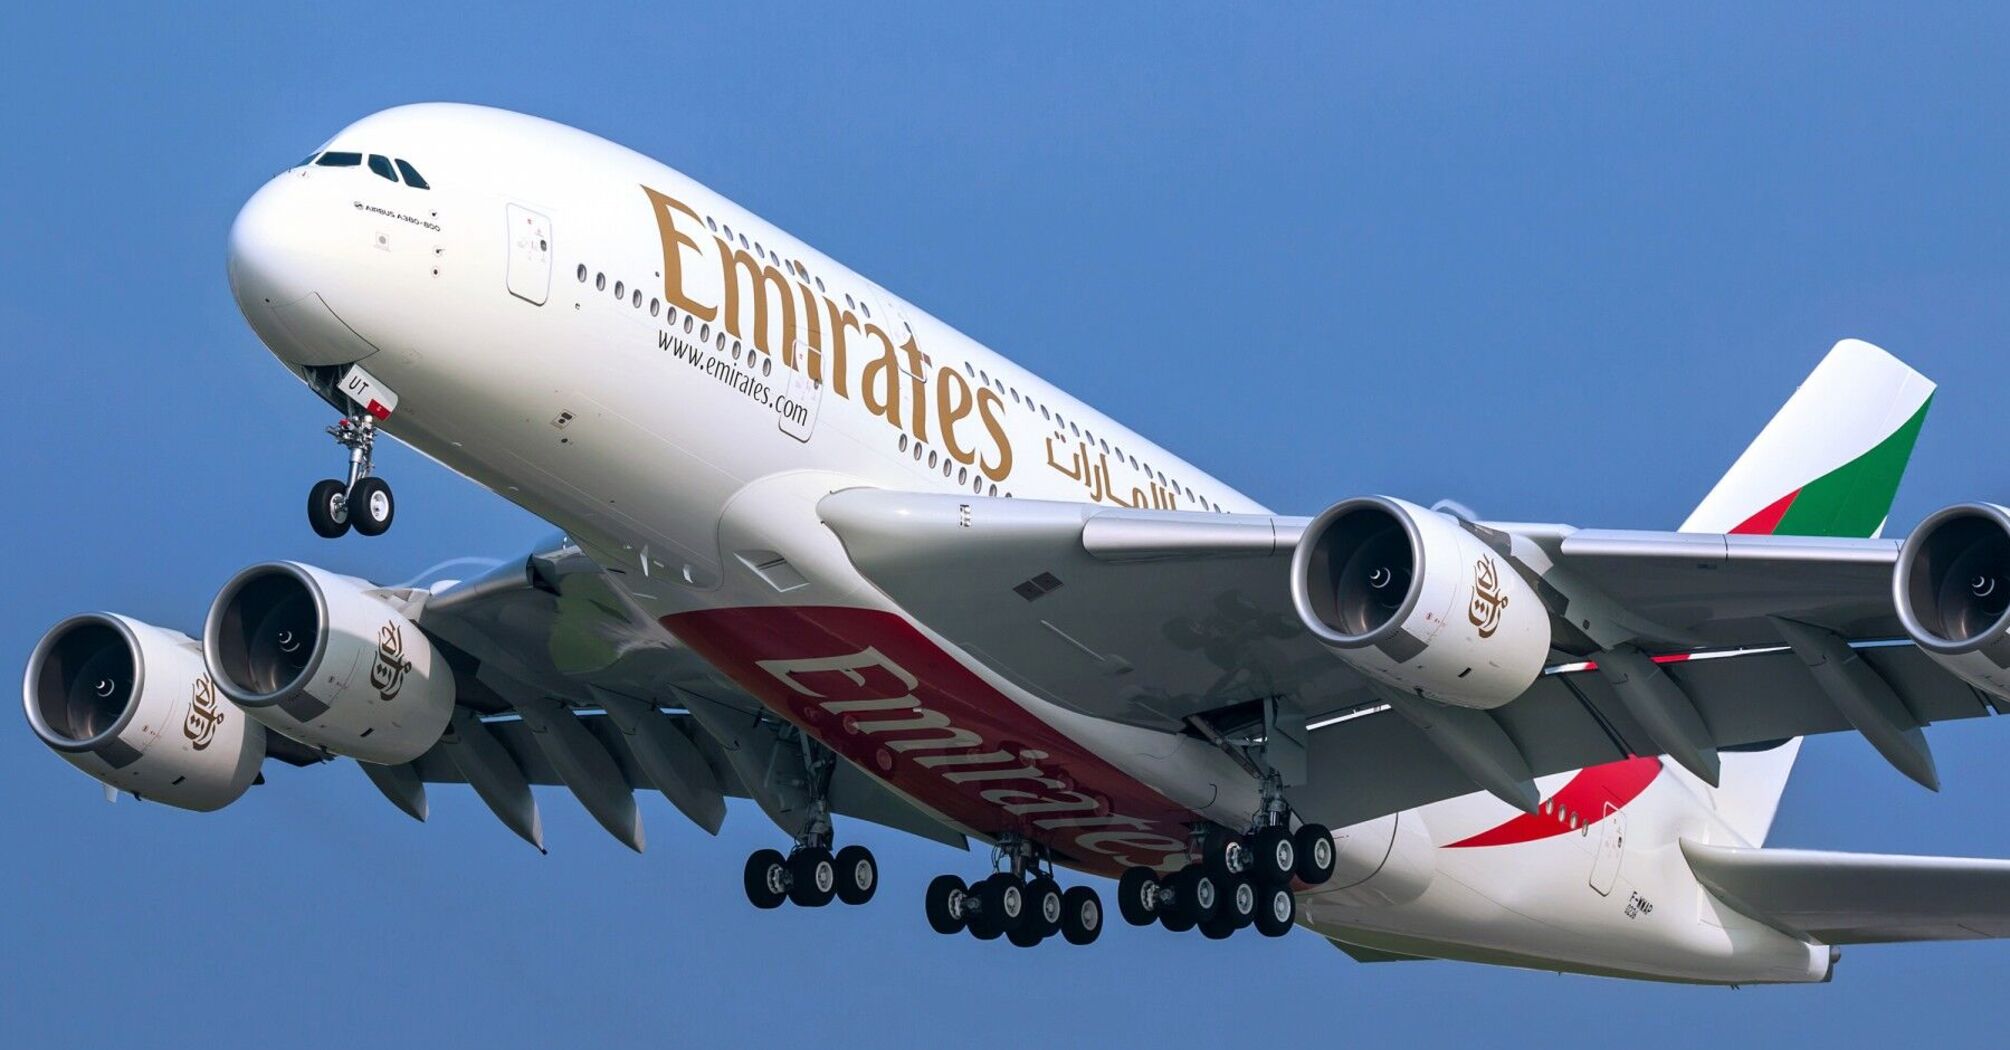 Emirates to launch a series of handbags and accessories